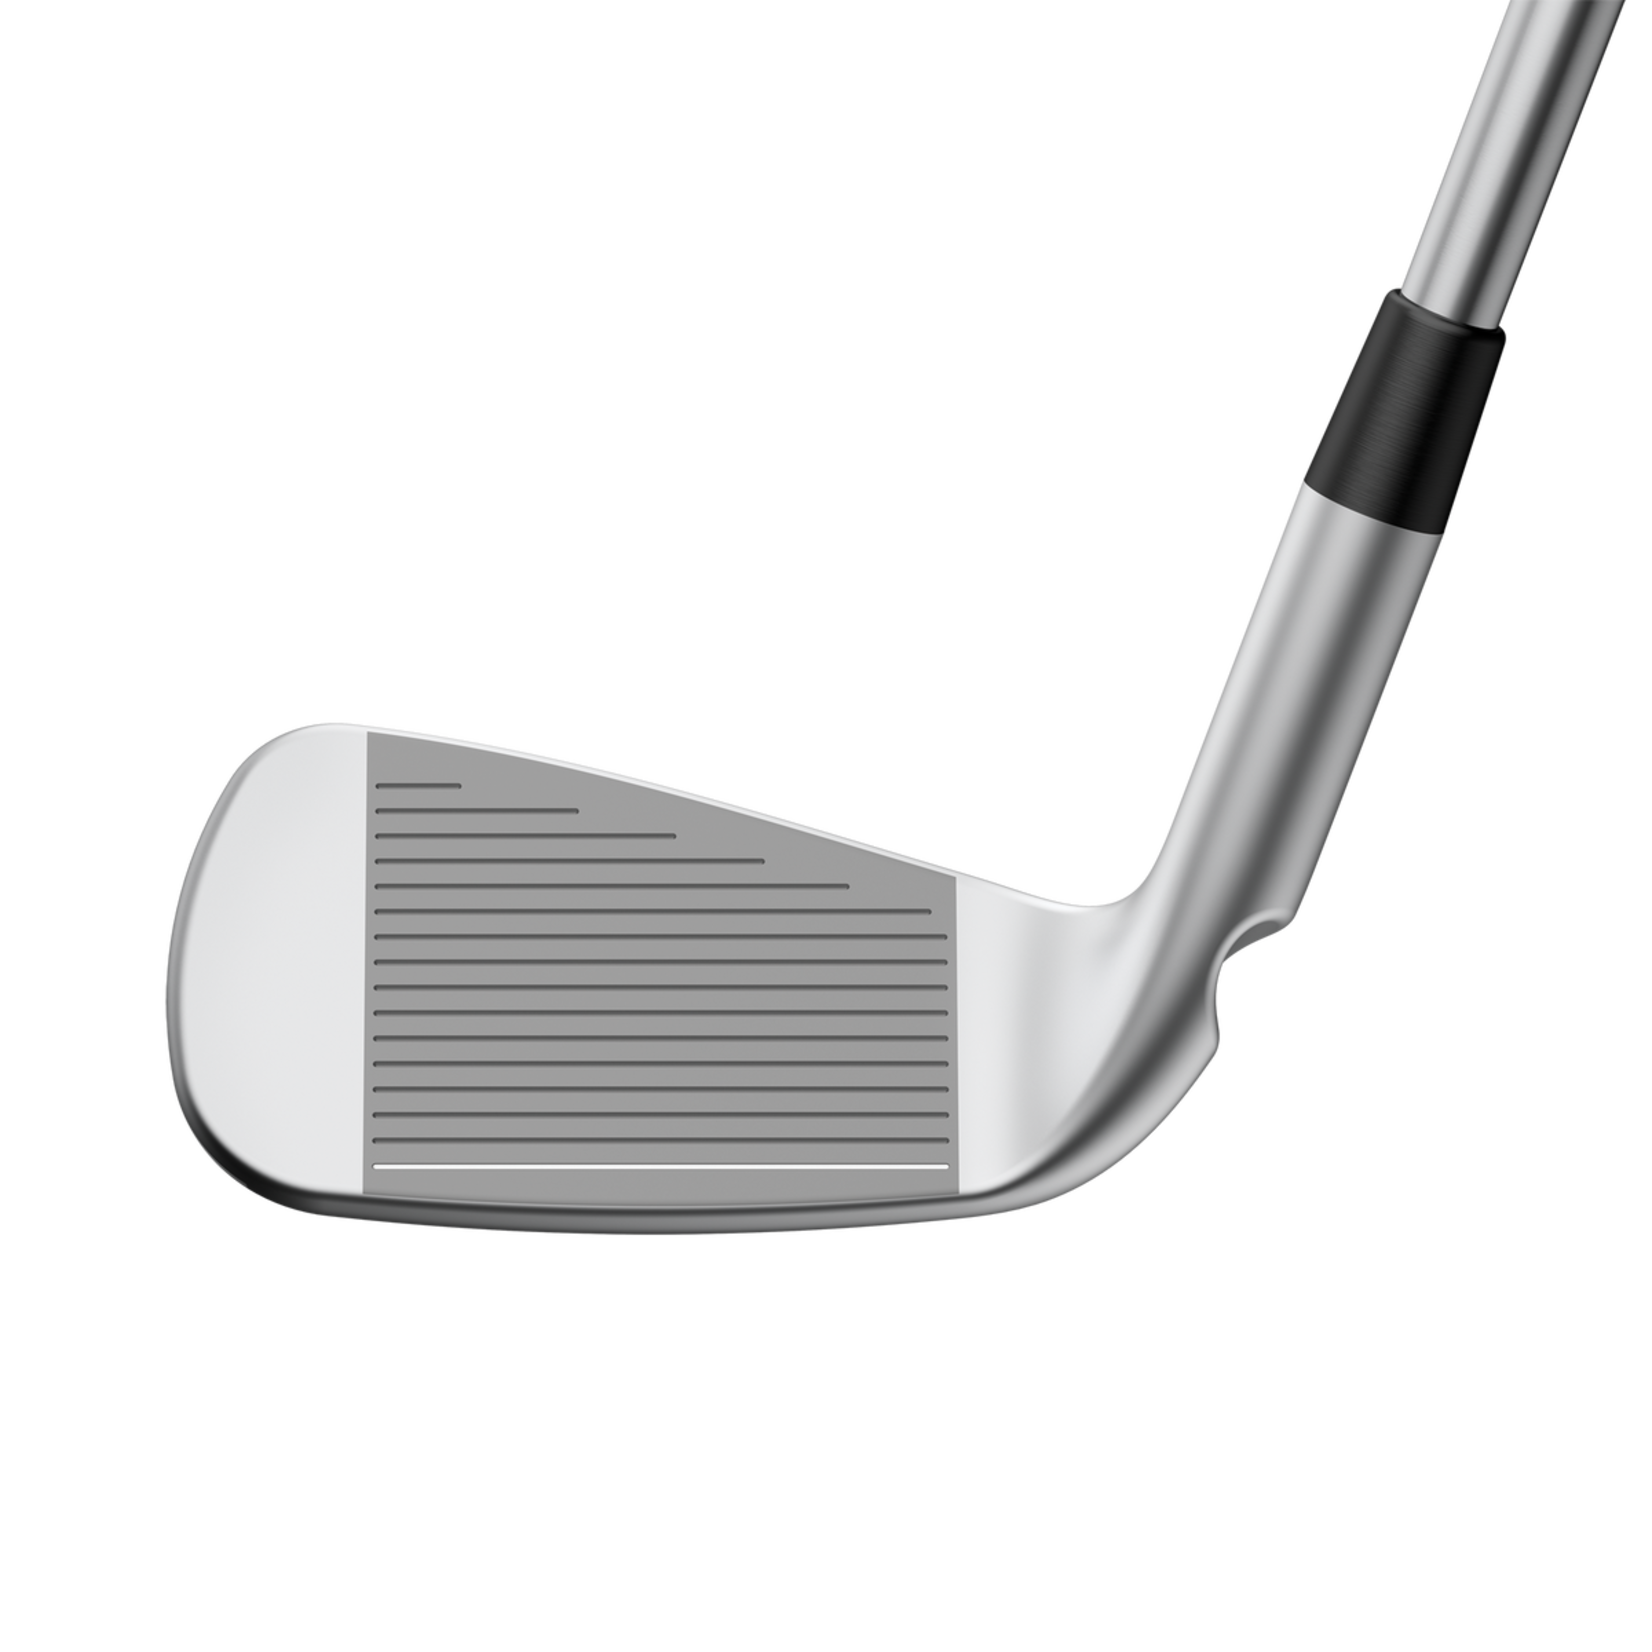 PING ChipR IRON RIGHT HAND